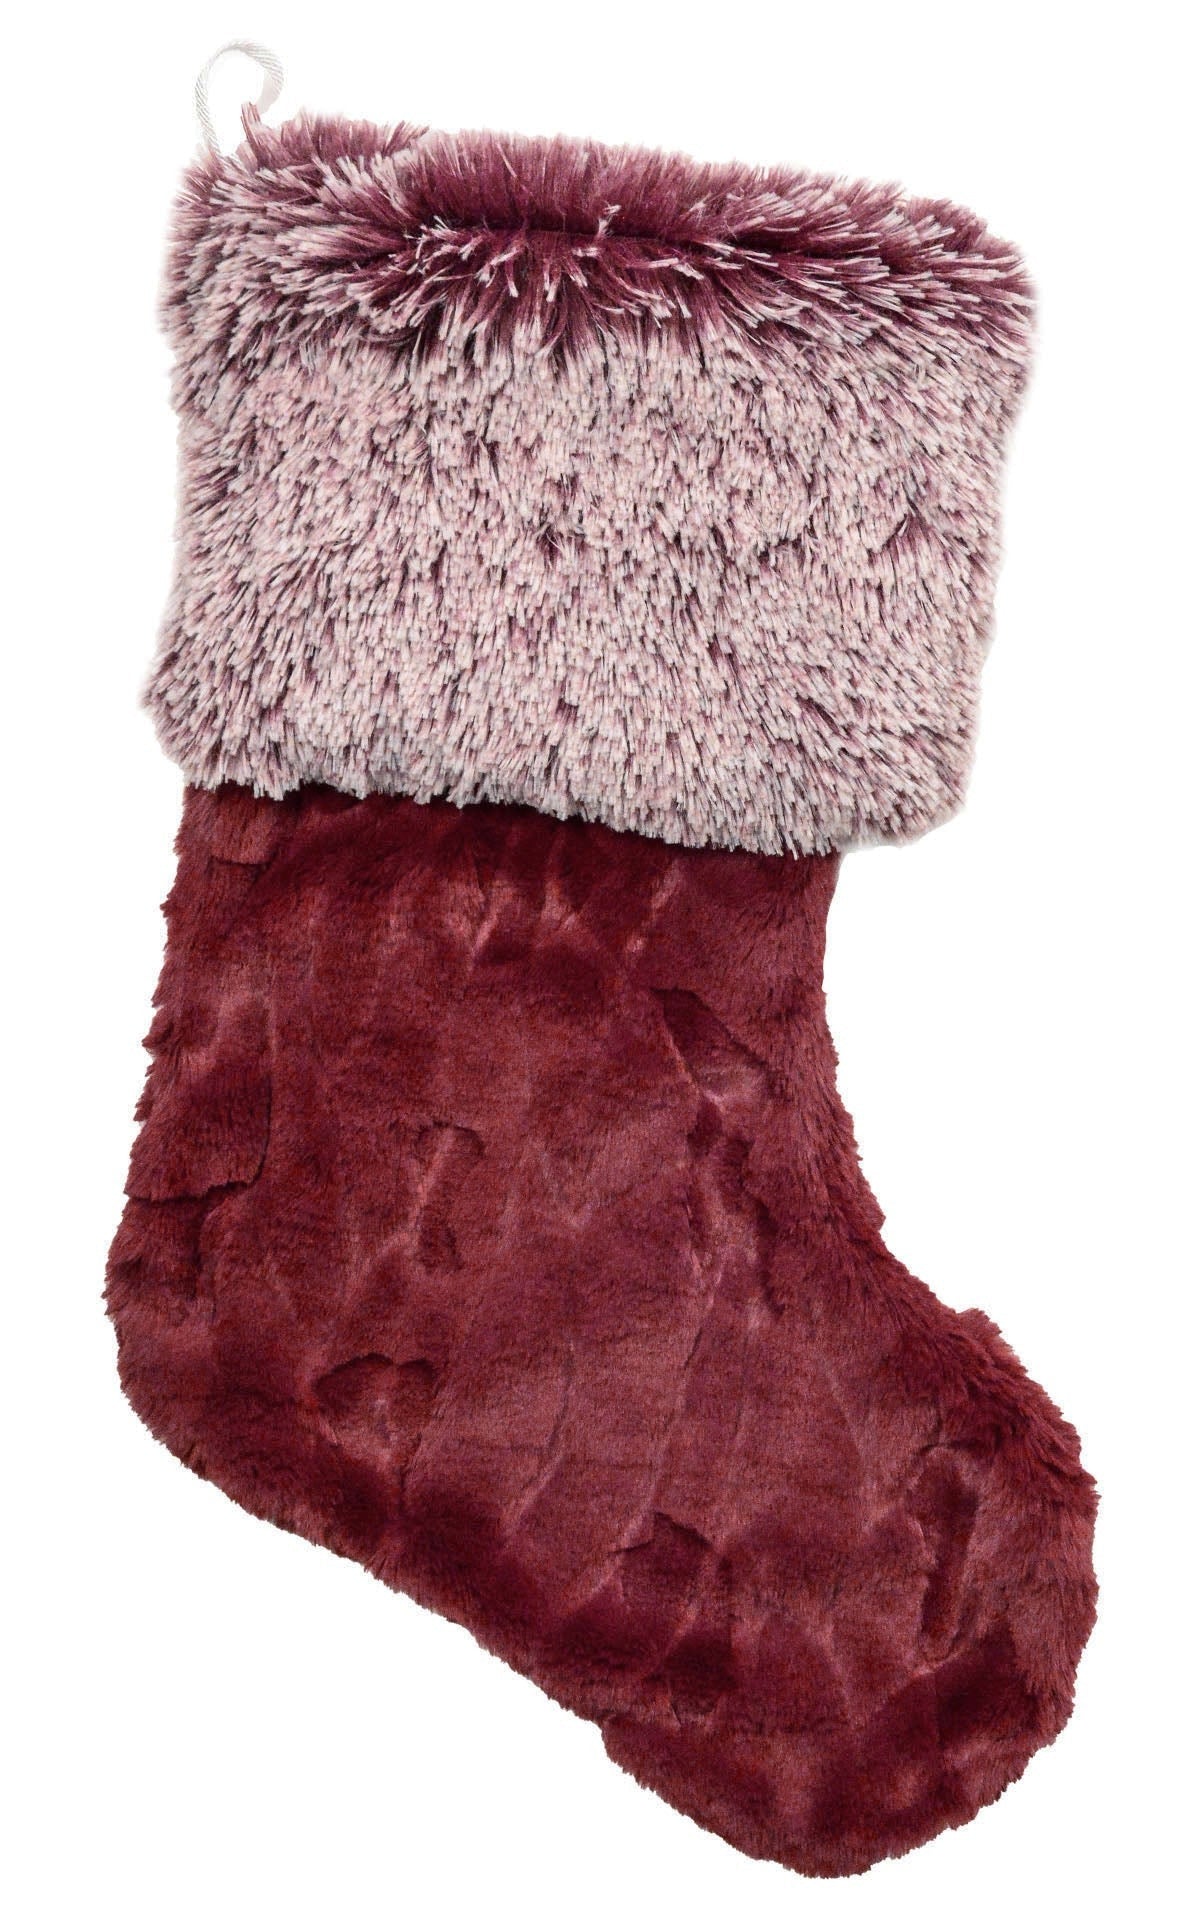 Pandemonium Millinery Christmas Stocking - Cranberry Creek Faux Fur with Berry Foxy Cuff 